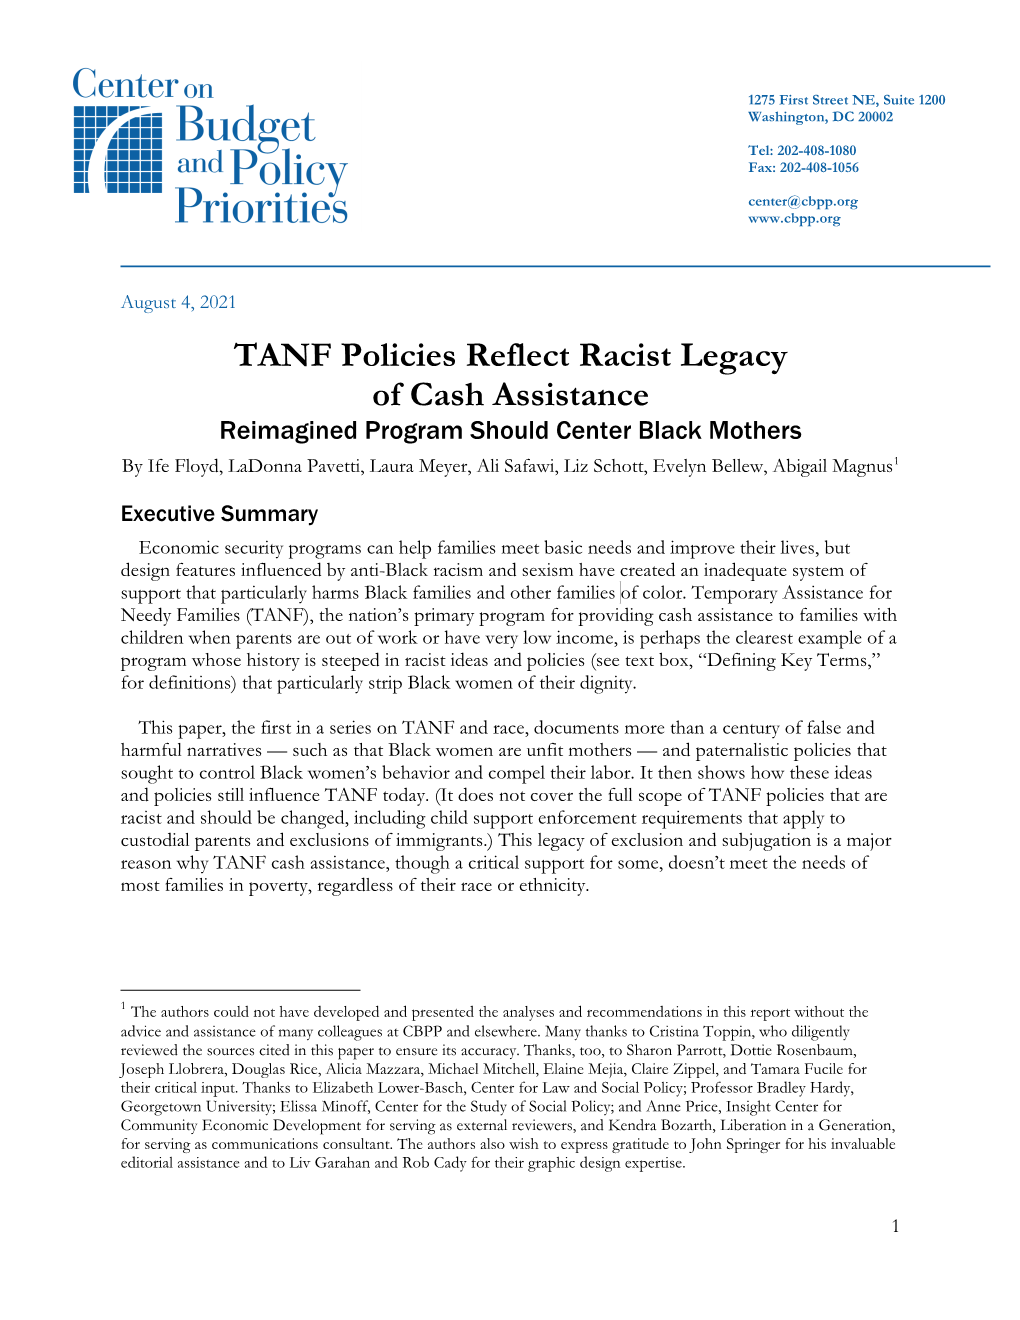 TANF Policies Reflect Racist Legacy of Cash Assistance